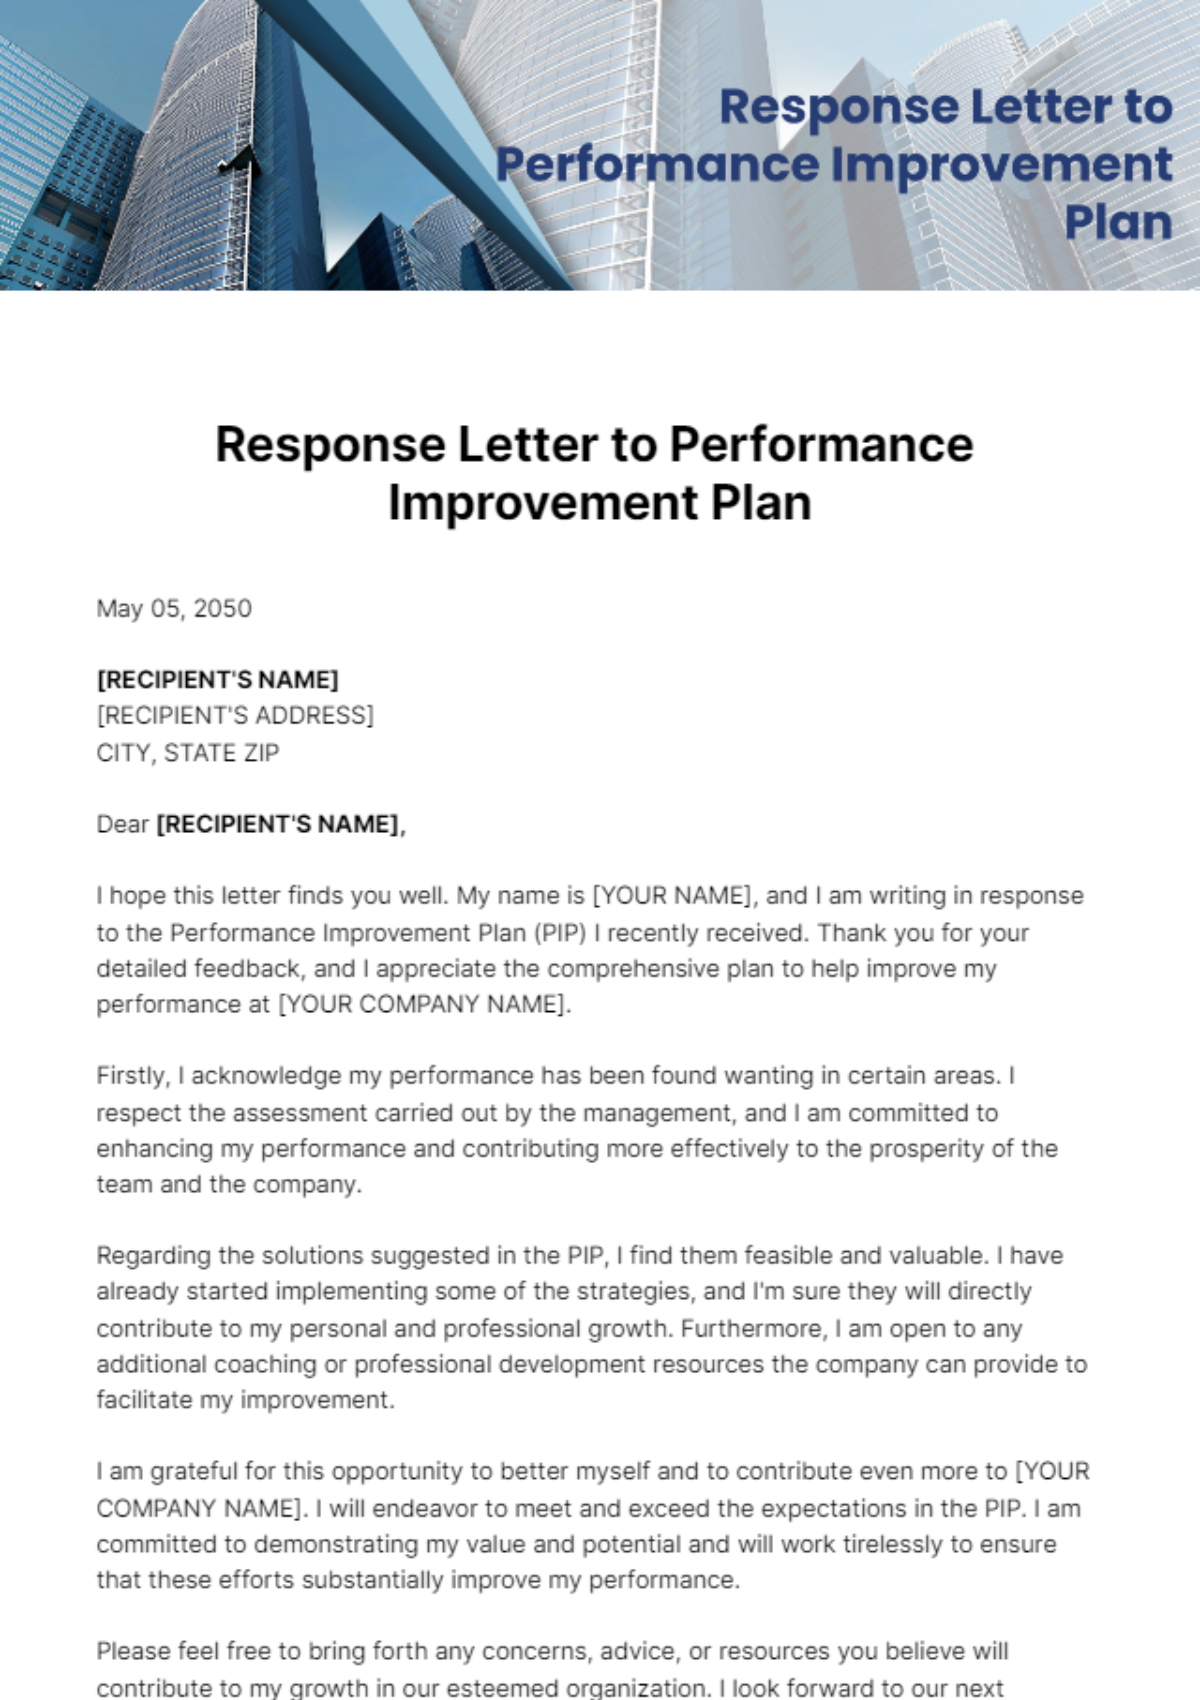 Response Letter to Performance Improvement Plan Template